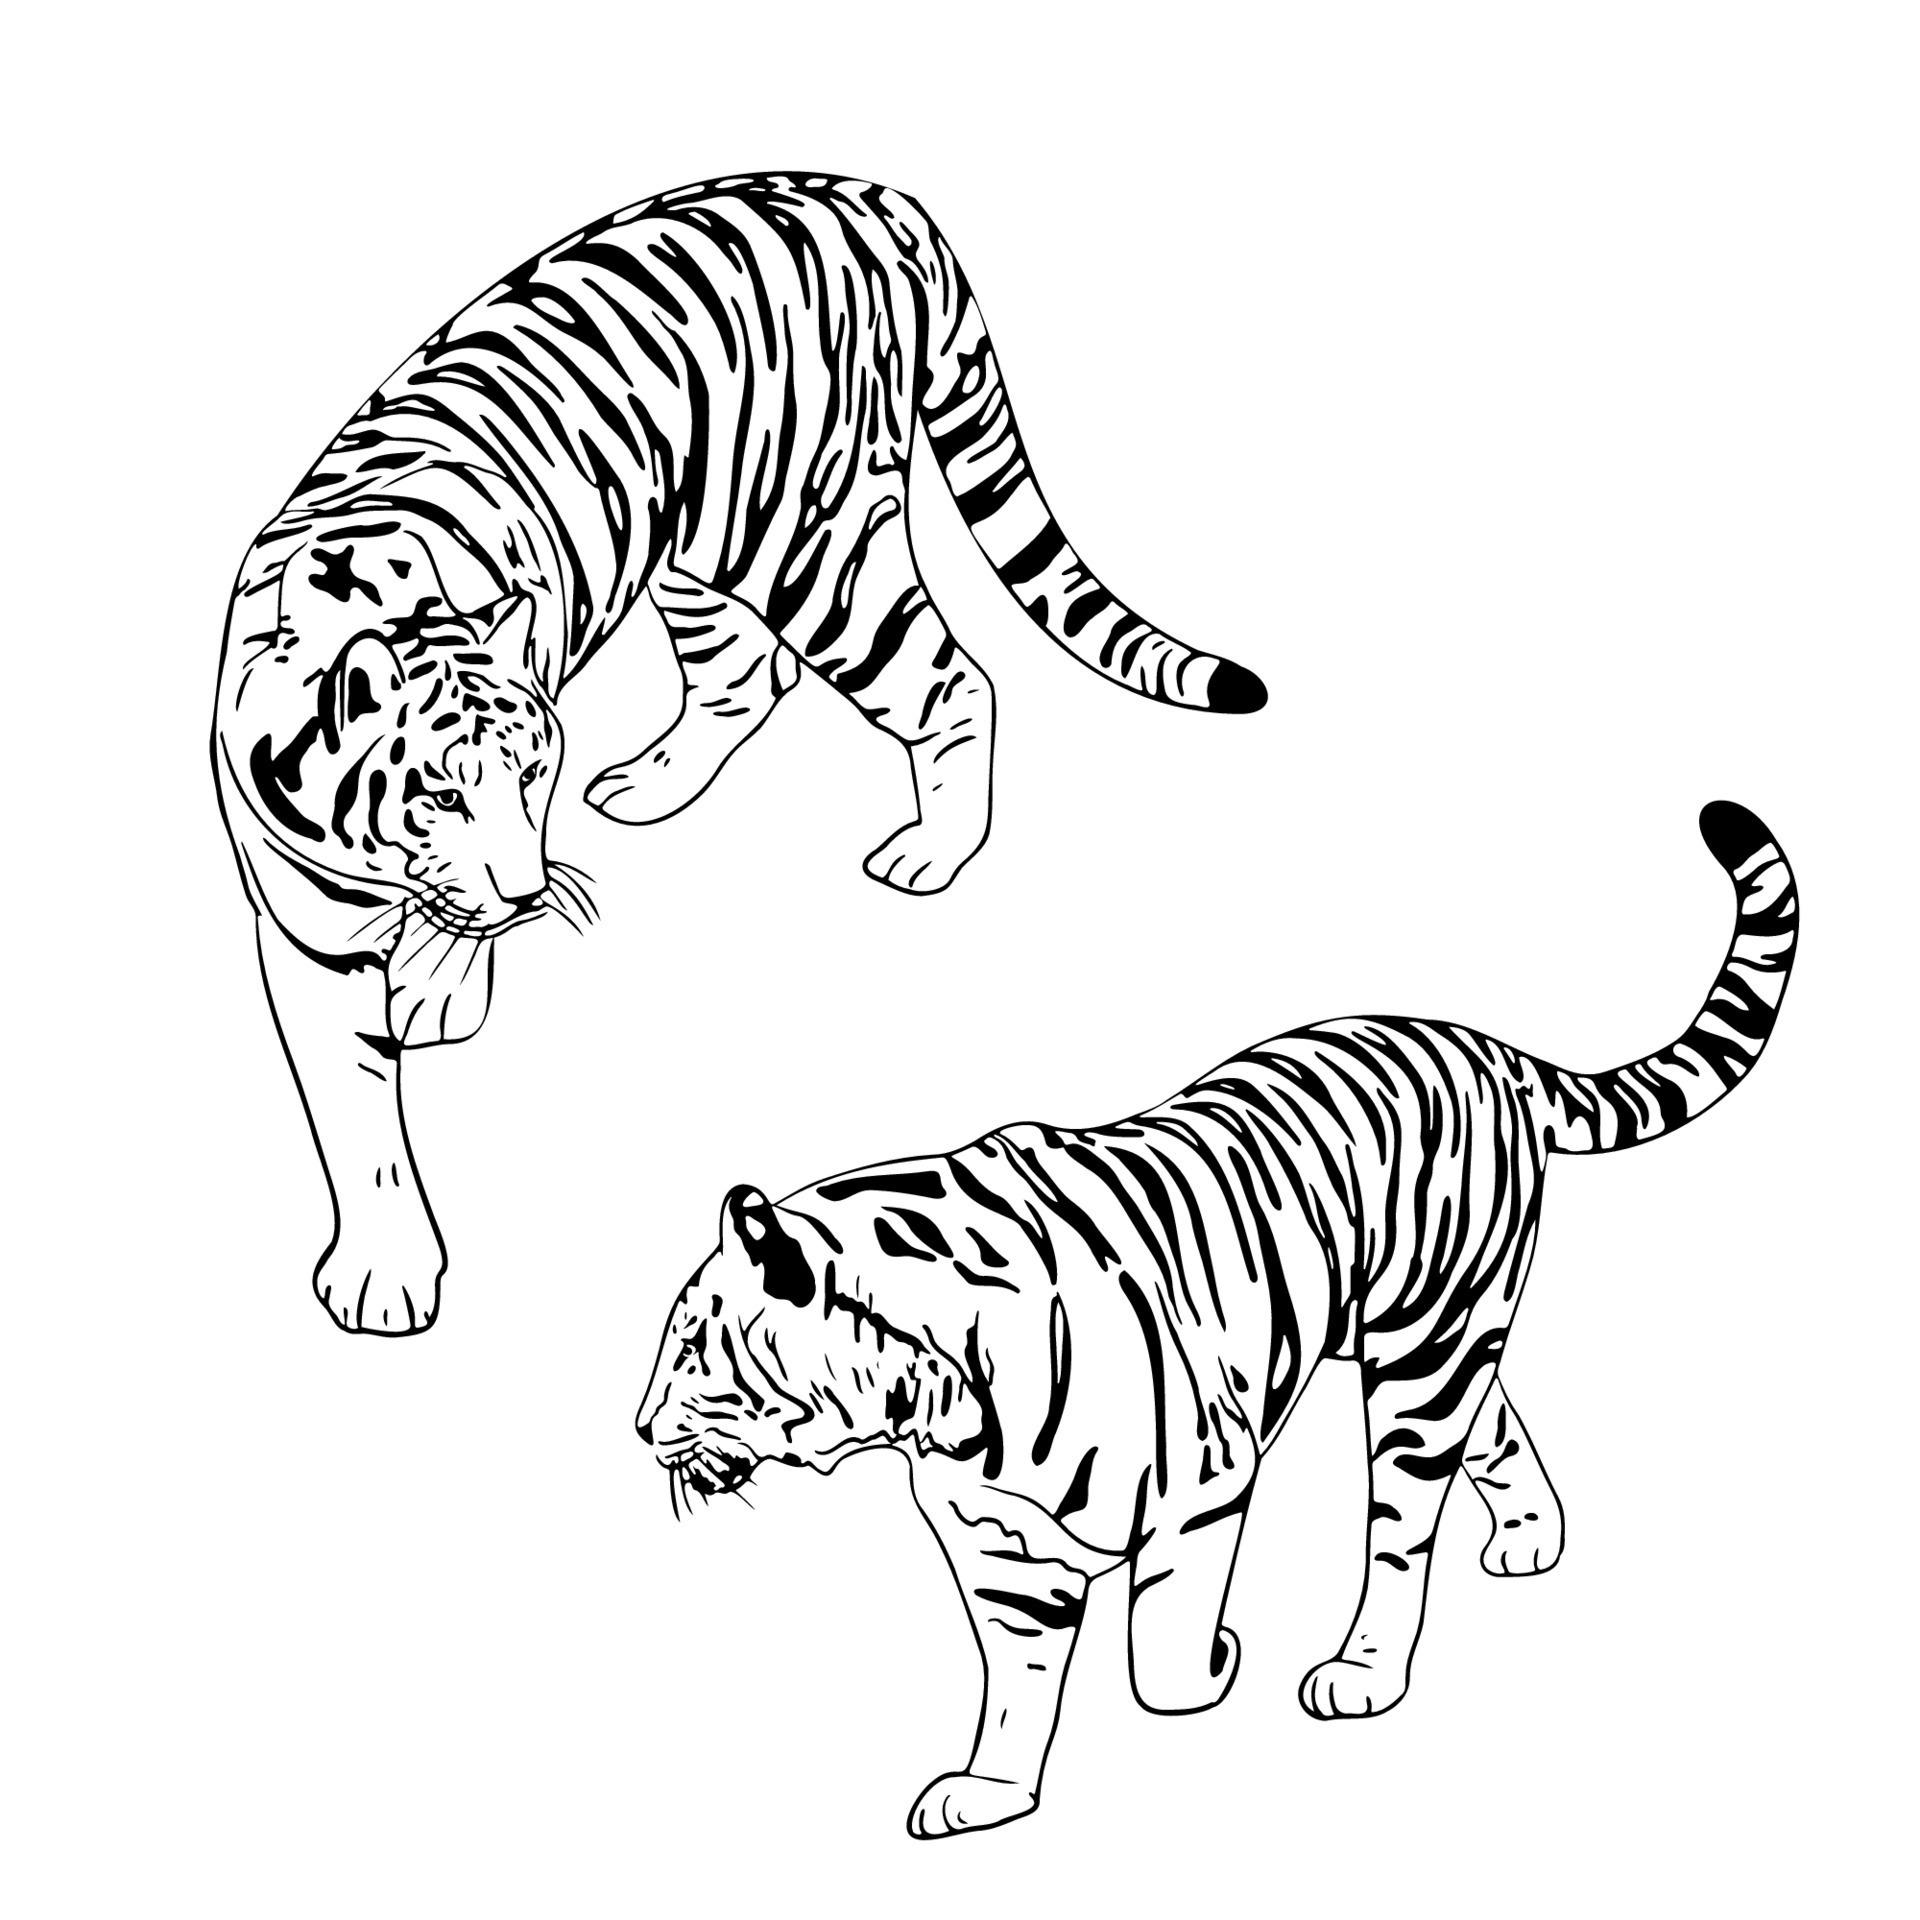 Tiger sketch zoo African and Indian wild animal  Stock Illustration  63126785  PIXTA